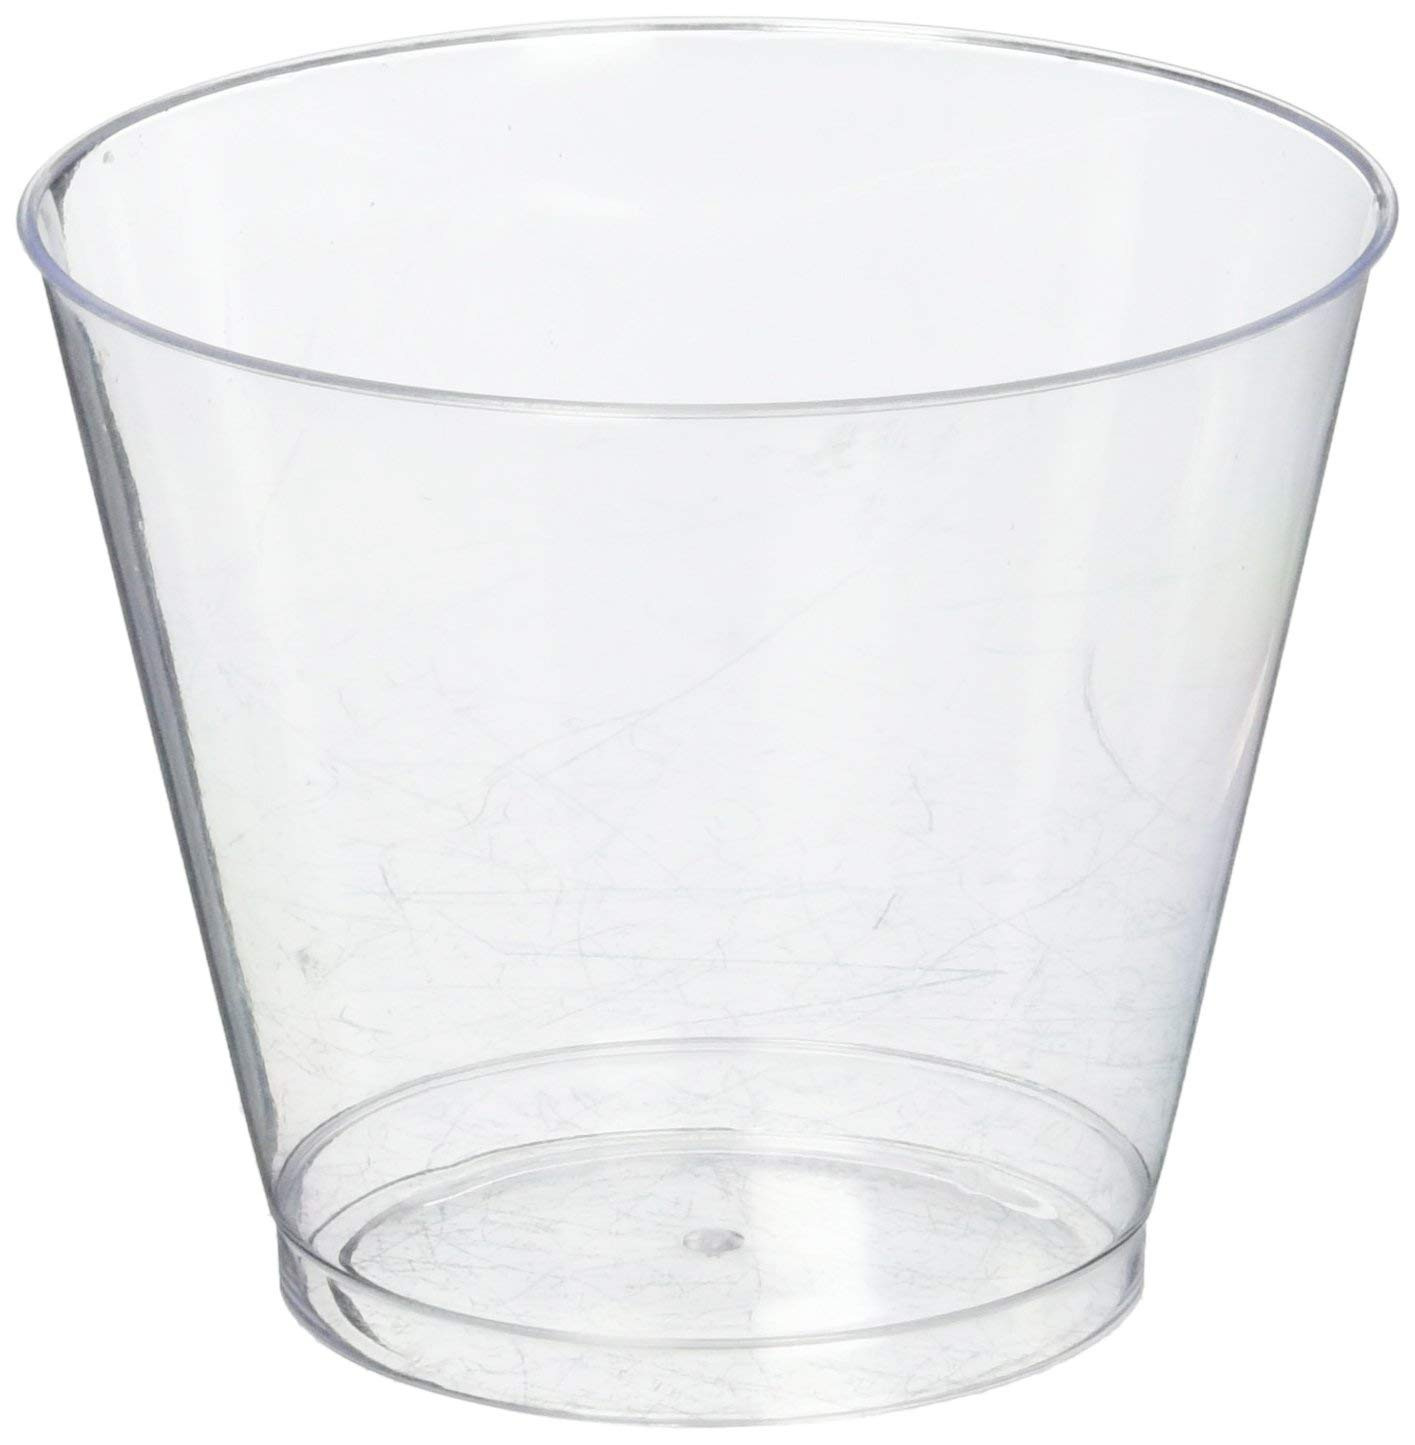 19 Elegant Tall Clear Cylinder Vases Bulk 2024 free download tall clear cylinder vases bulk of amazon com hard plastic tumblers 9 oz party cups old fashioned within amazon com hard plastic tumblers 9 oz party cups old fashioned glass 100 count drinkin